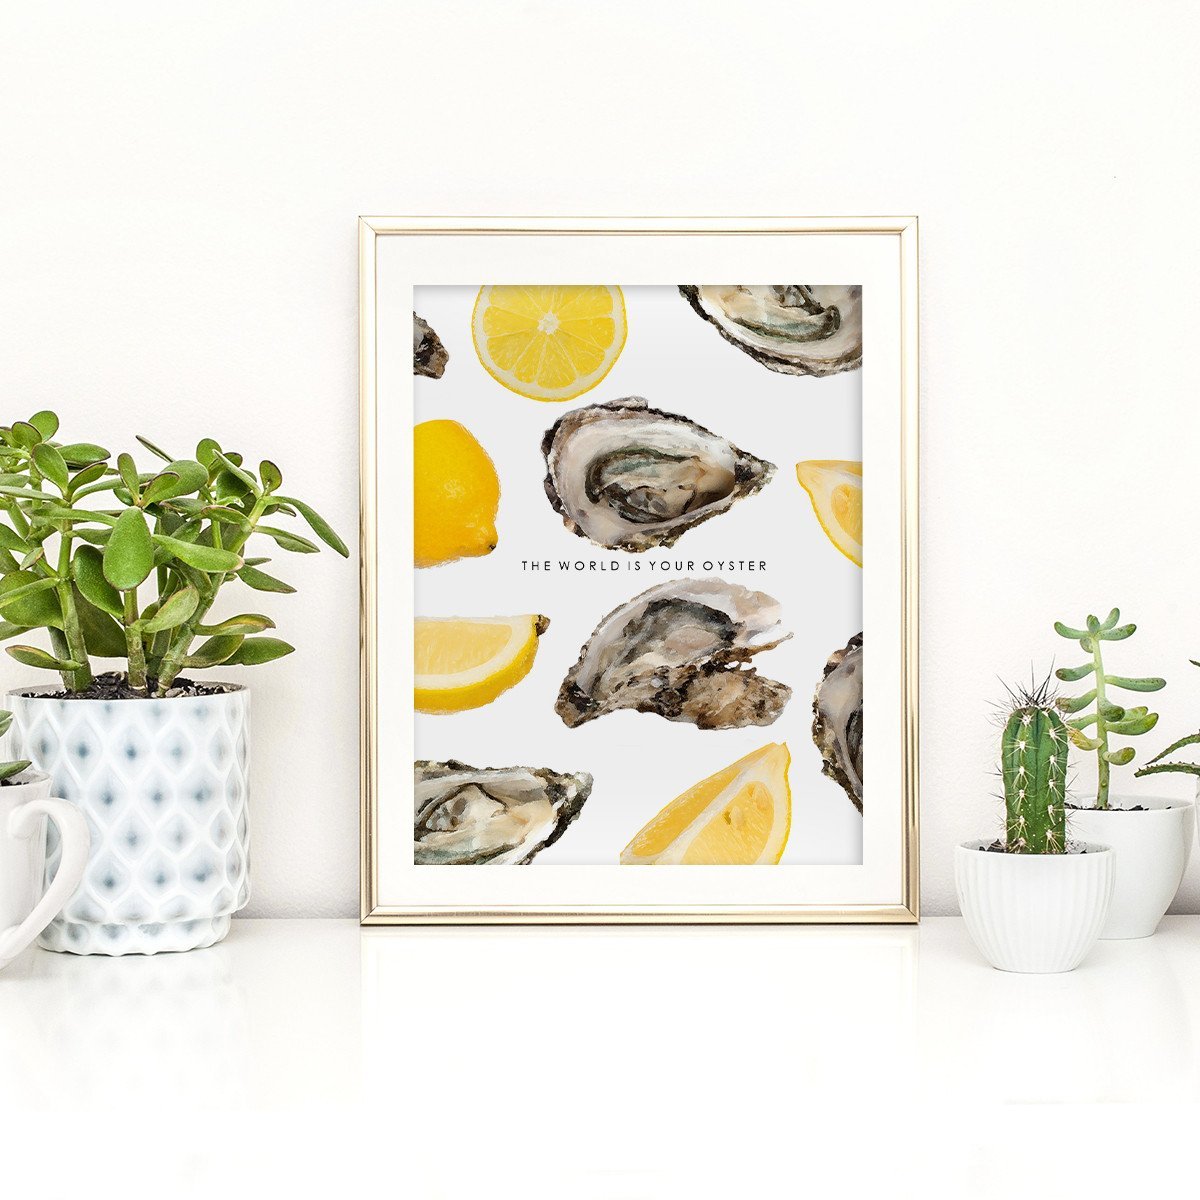 Gallery Prints 12x16 The World is Your Oyster Print dombezalergii